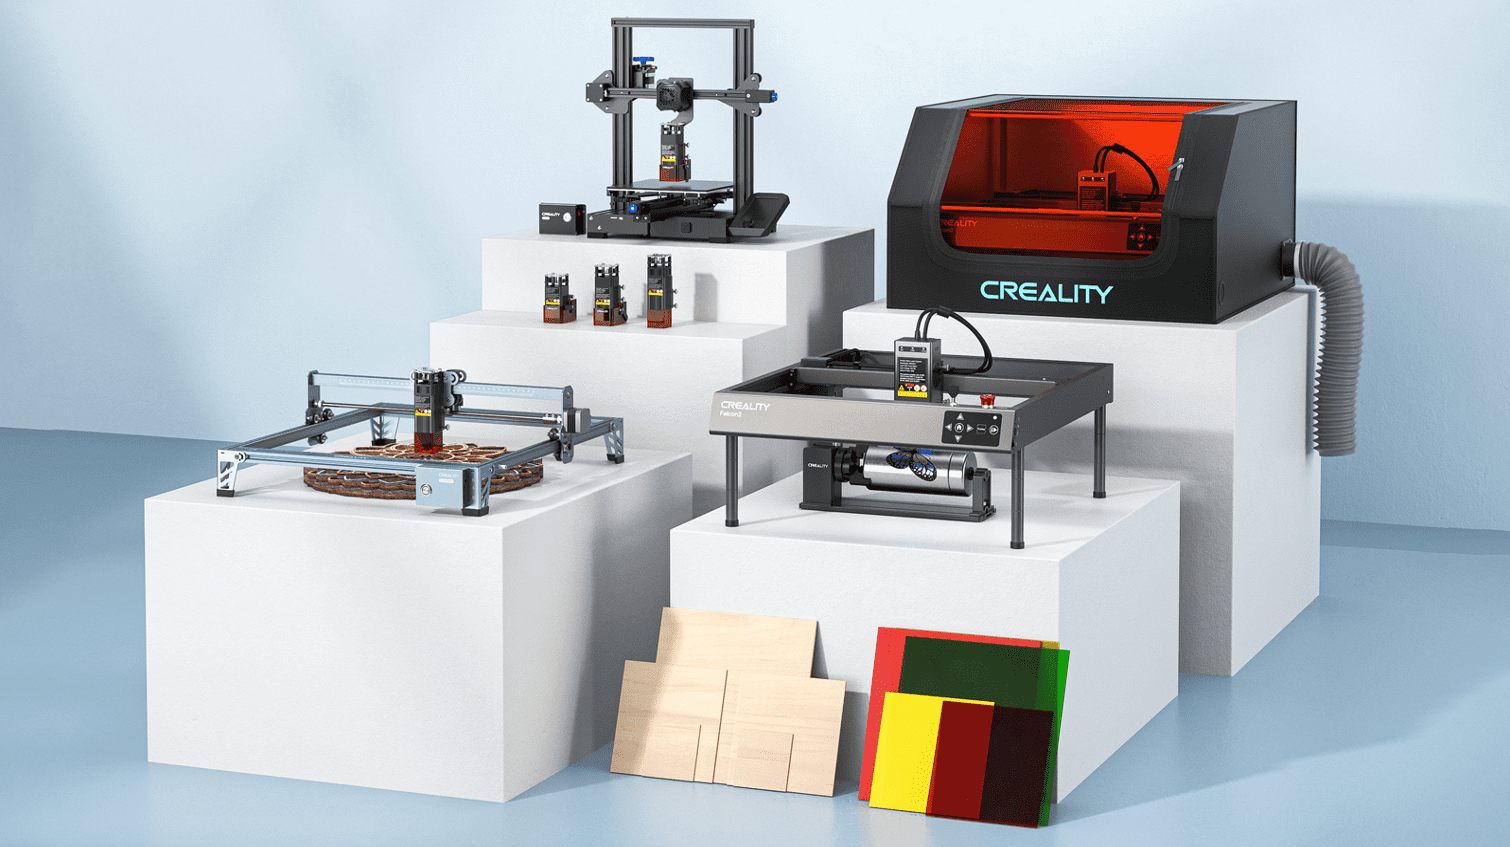 Creality's Laser Engraver Full Series: A Deep Dive into Five Models (Ad)